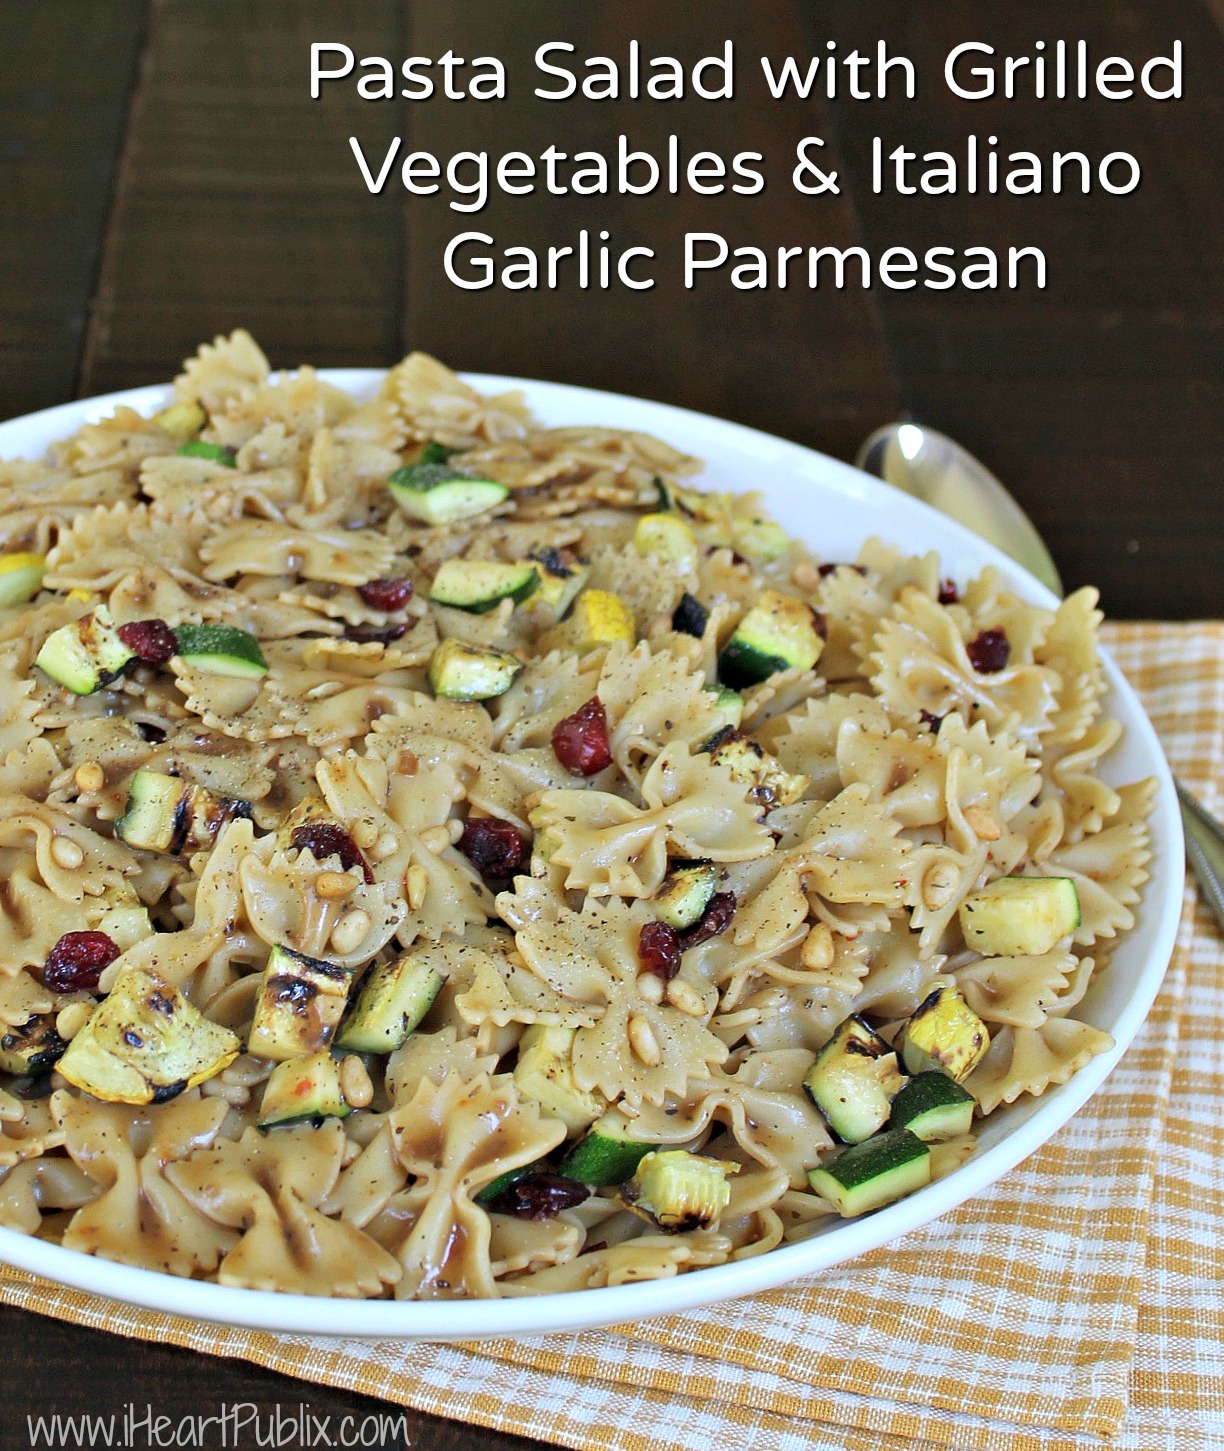 Pasta Salad with Grilled Vegetables & Italiano Garlic Parmesan